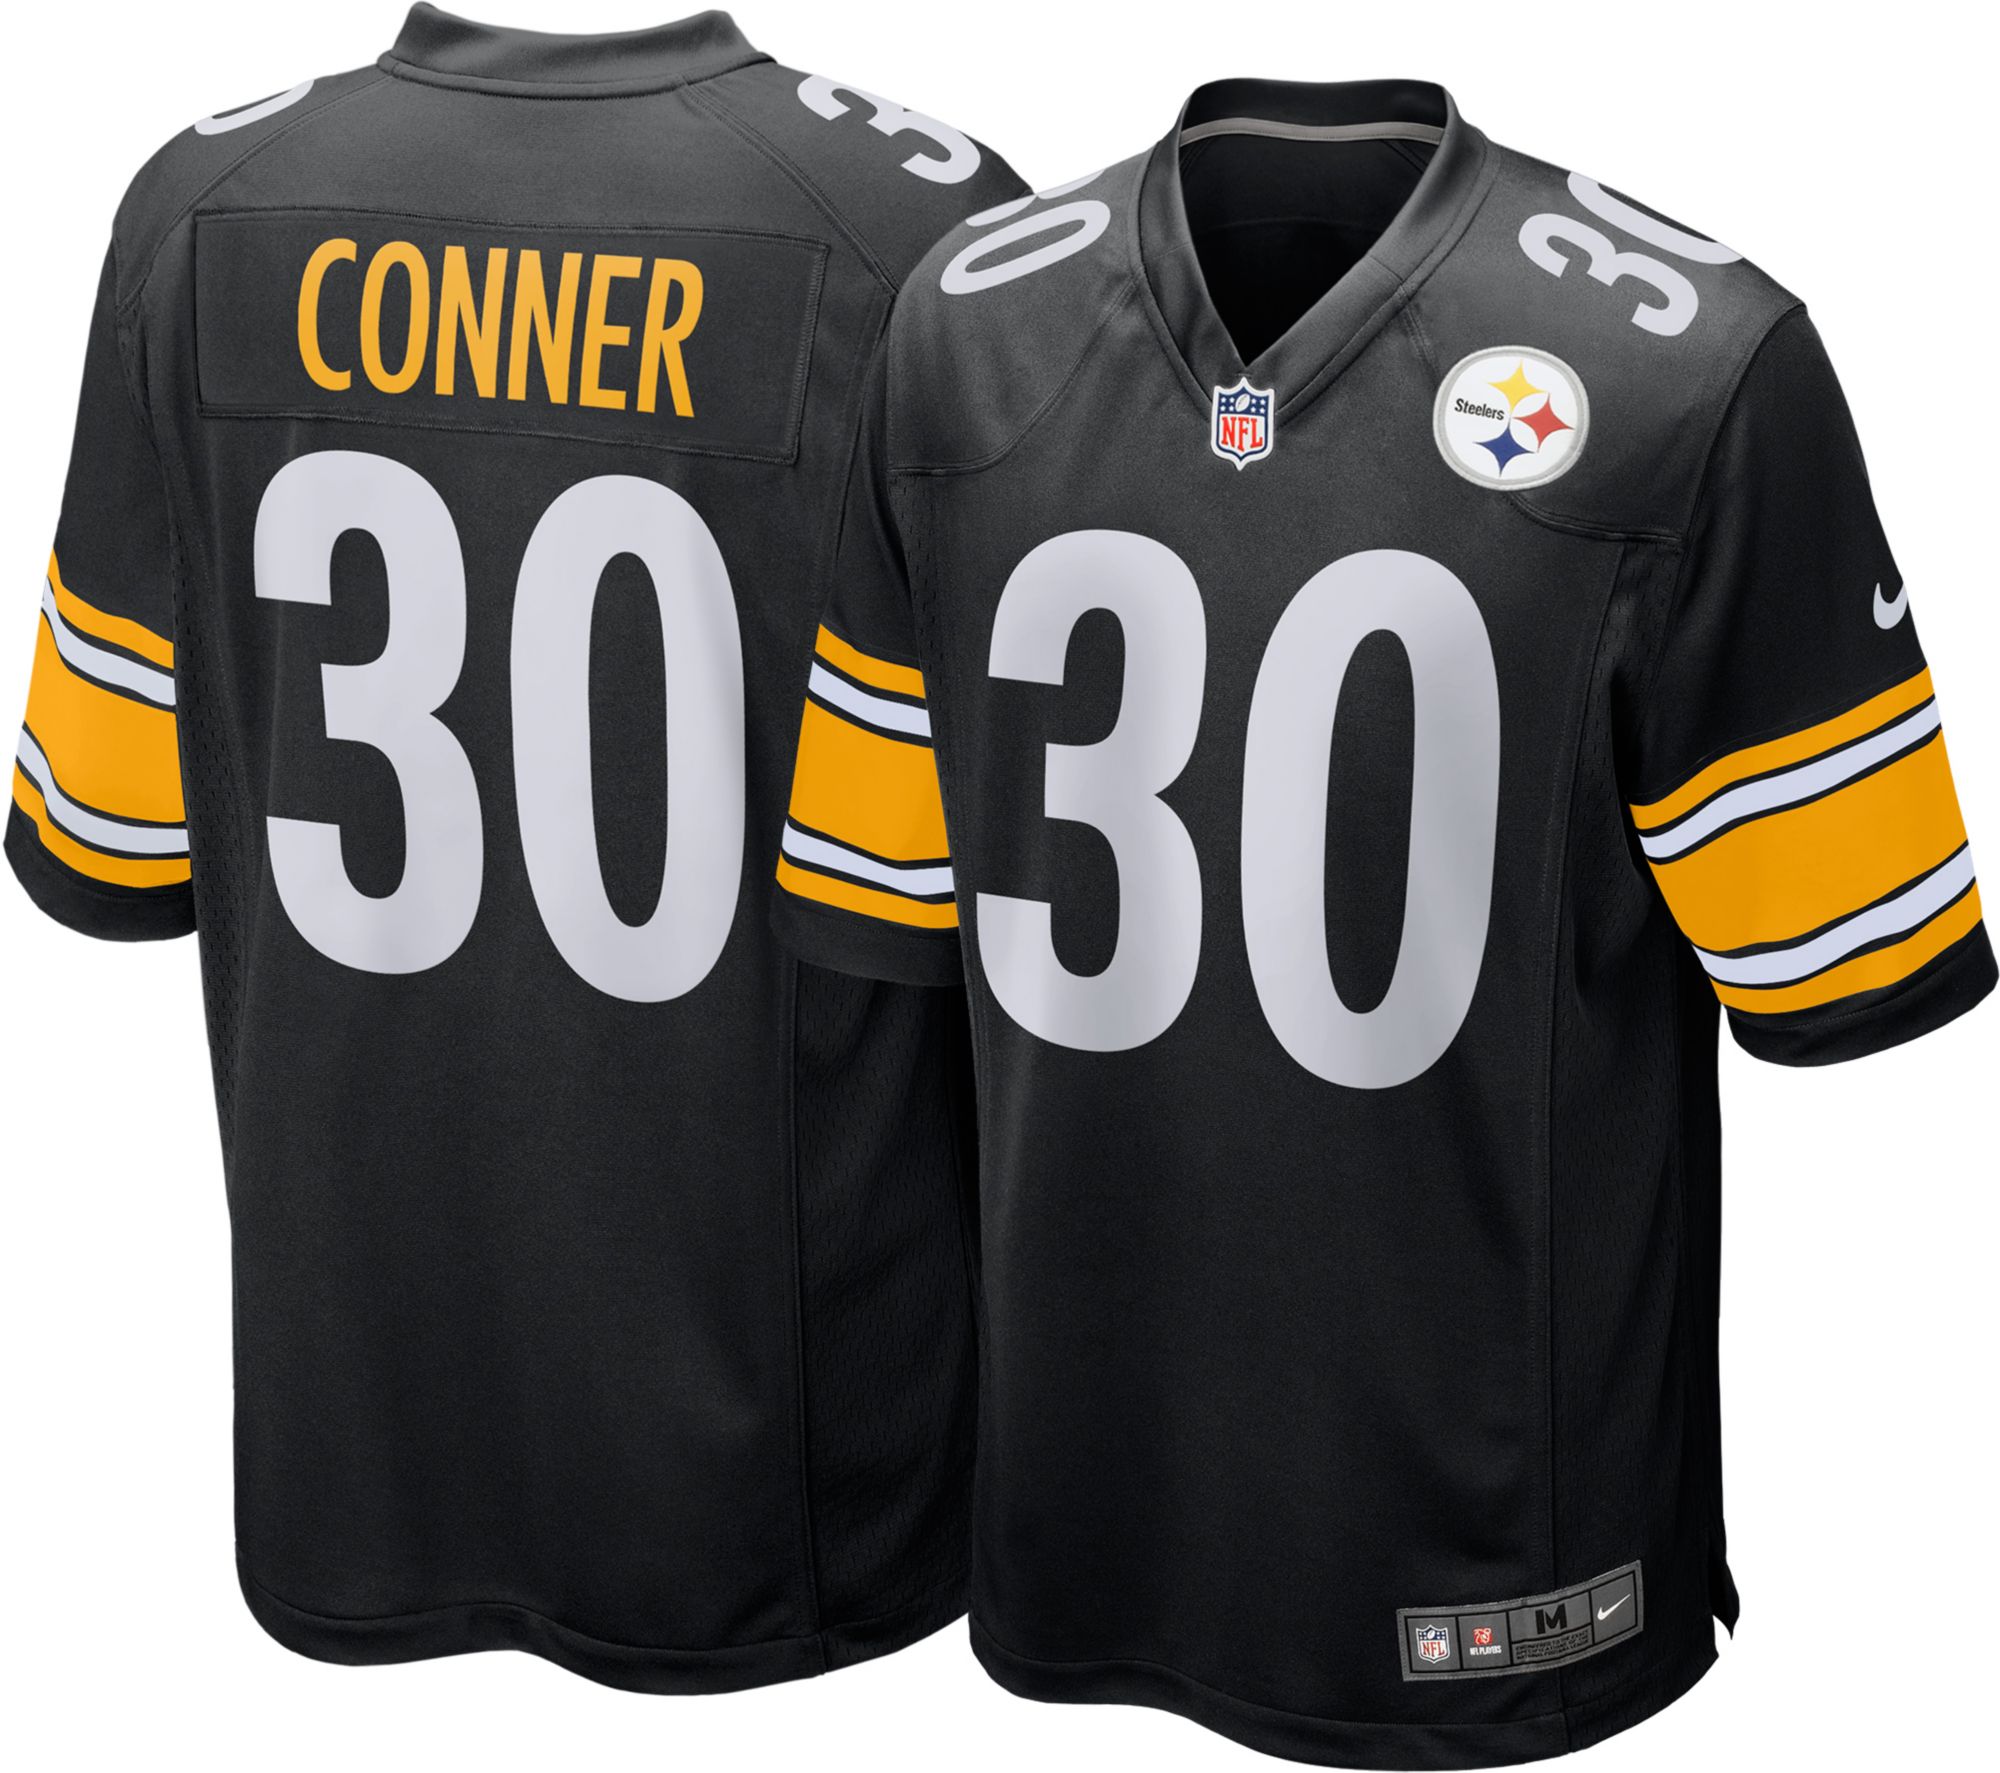 james conner jersey youth